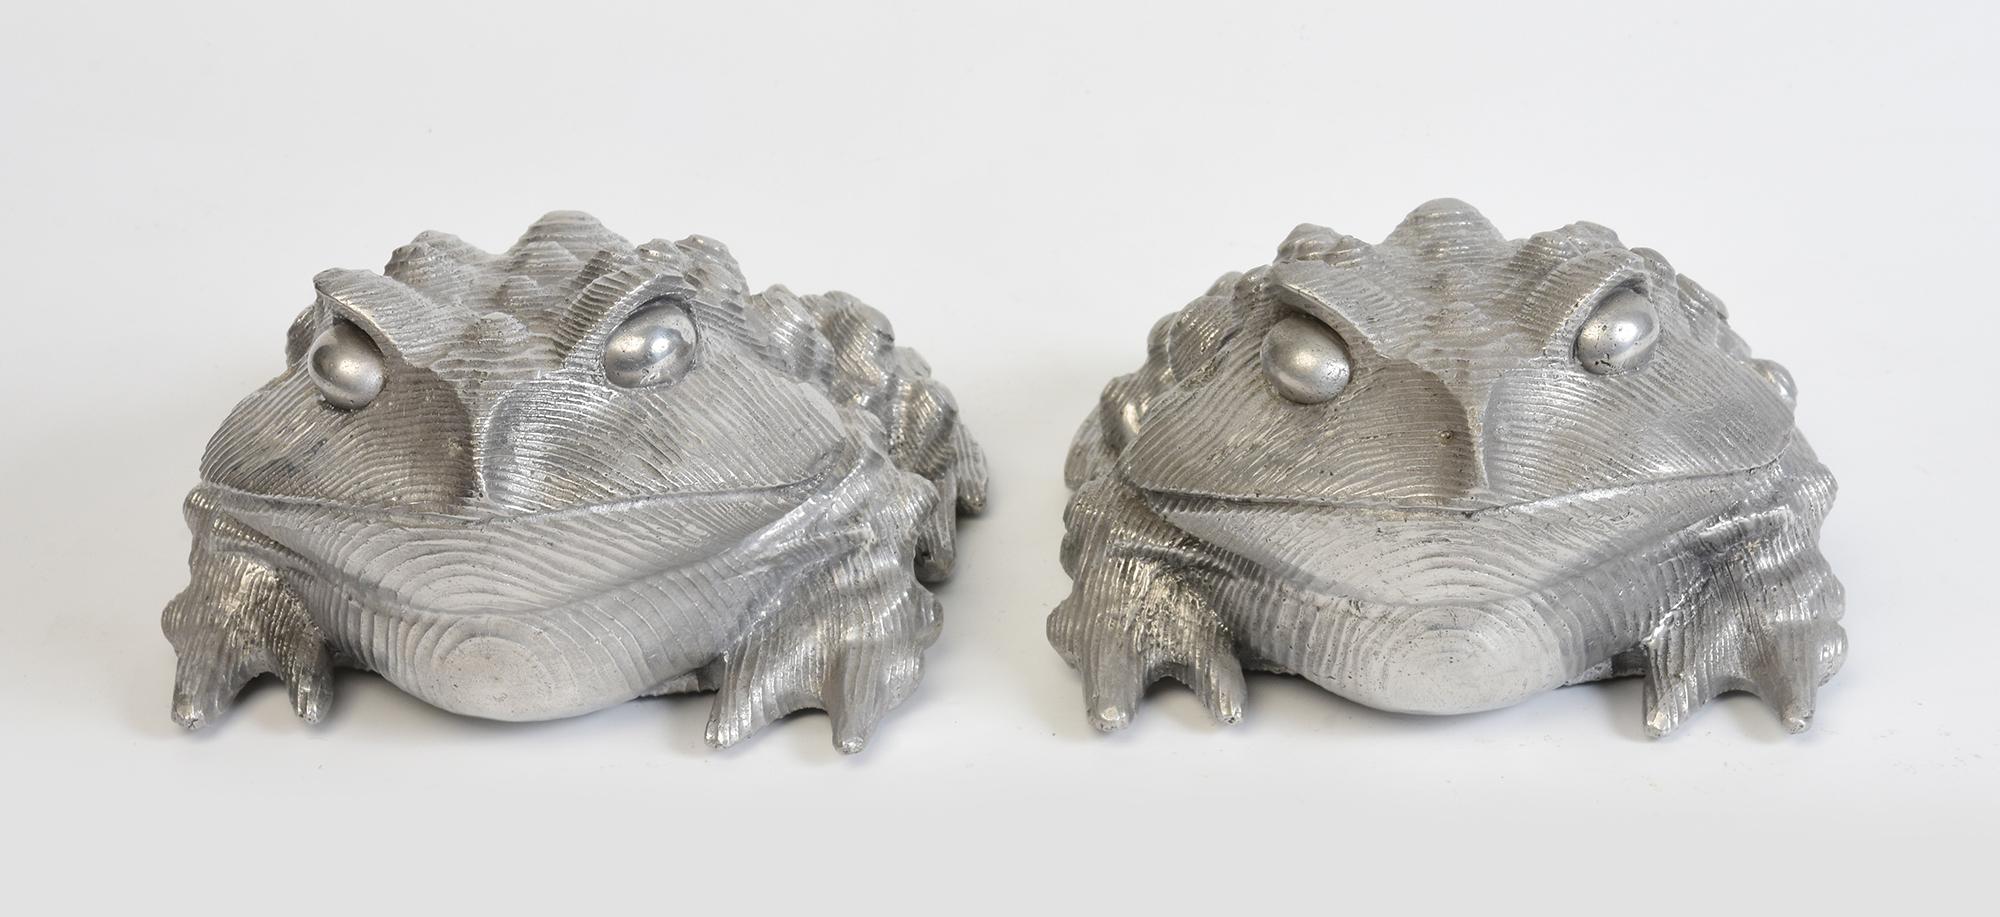 A pair of Japanese bronze toads.

Age: Japan, Contemporary
Size: Height 10.5 C.M. / Width 16.5 C.M. / Length 20.3 C.M.
Condition: Nice condition overall.